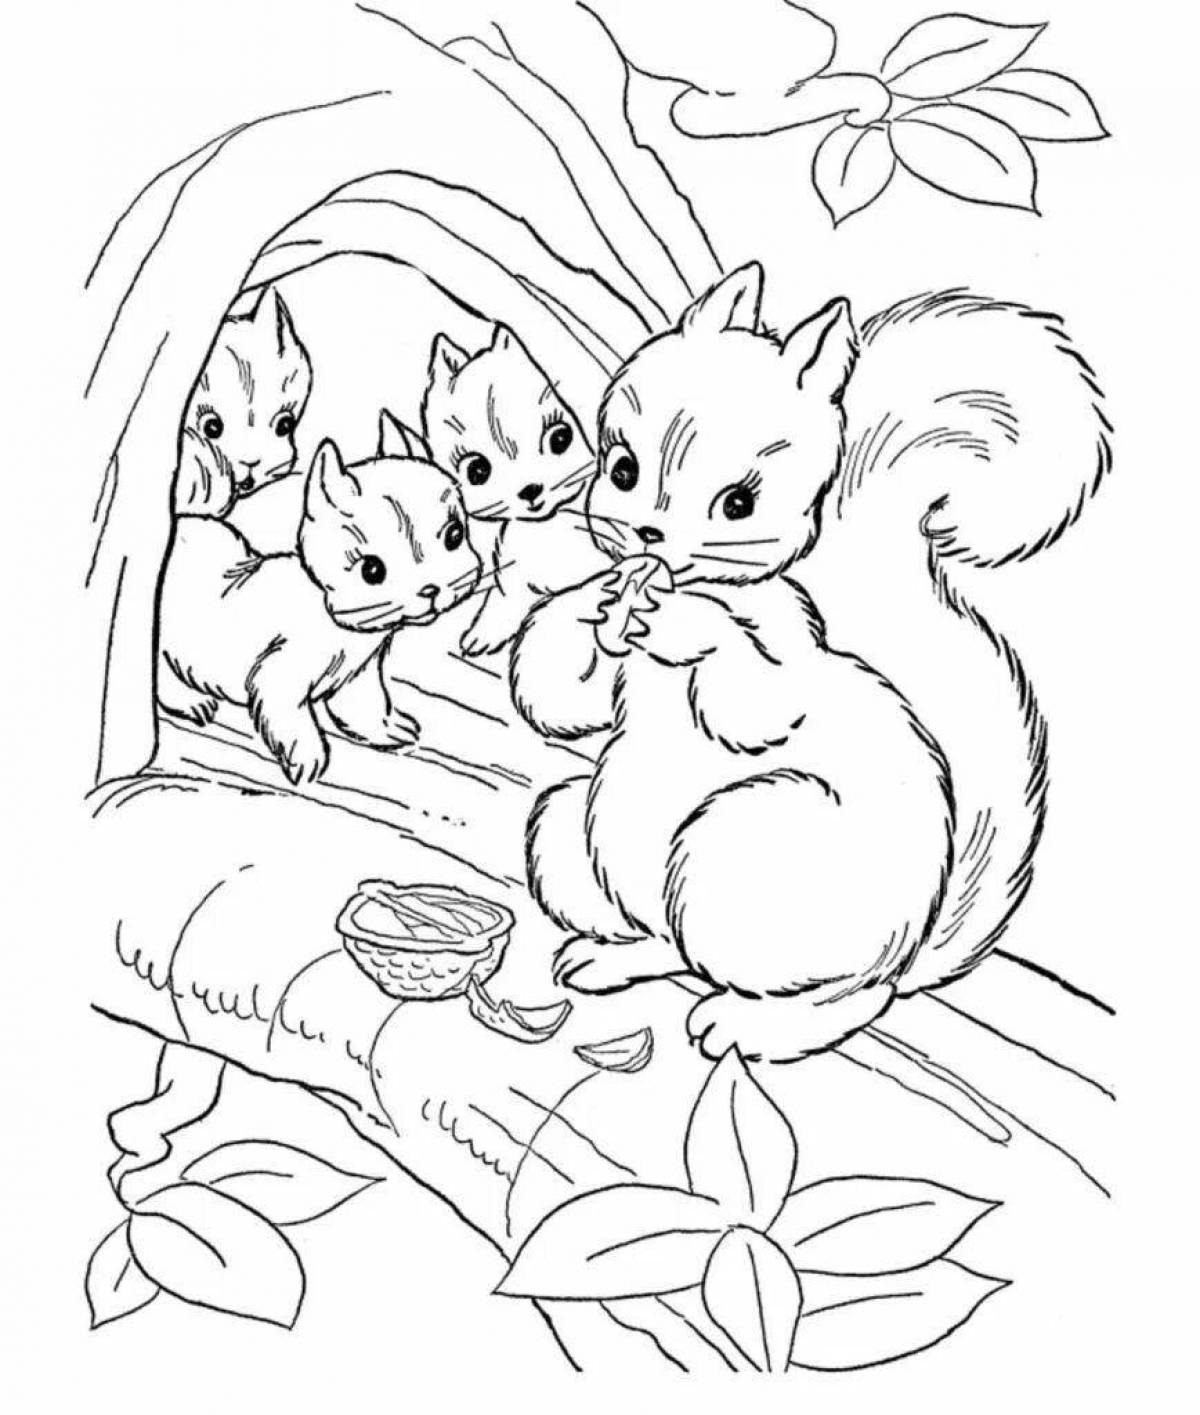 Magic forest animals coloring page for kids